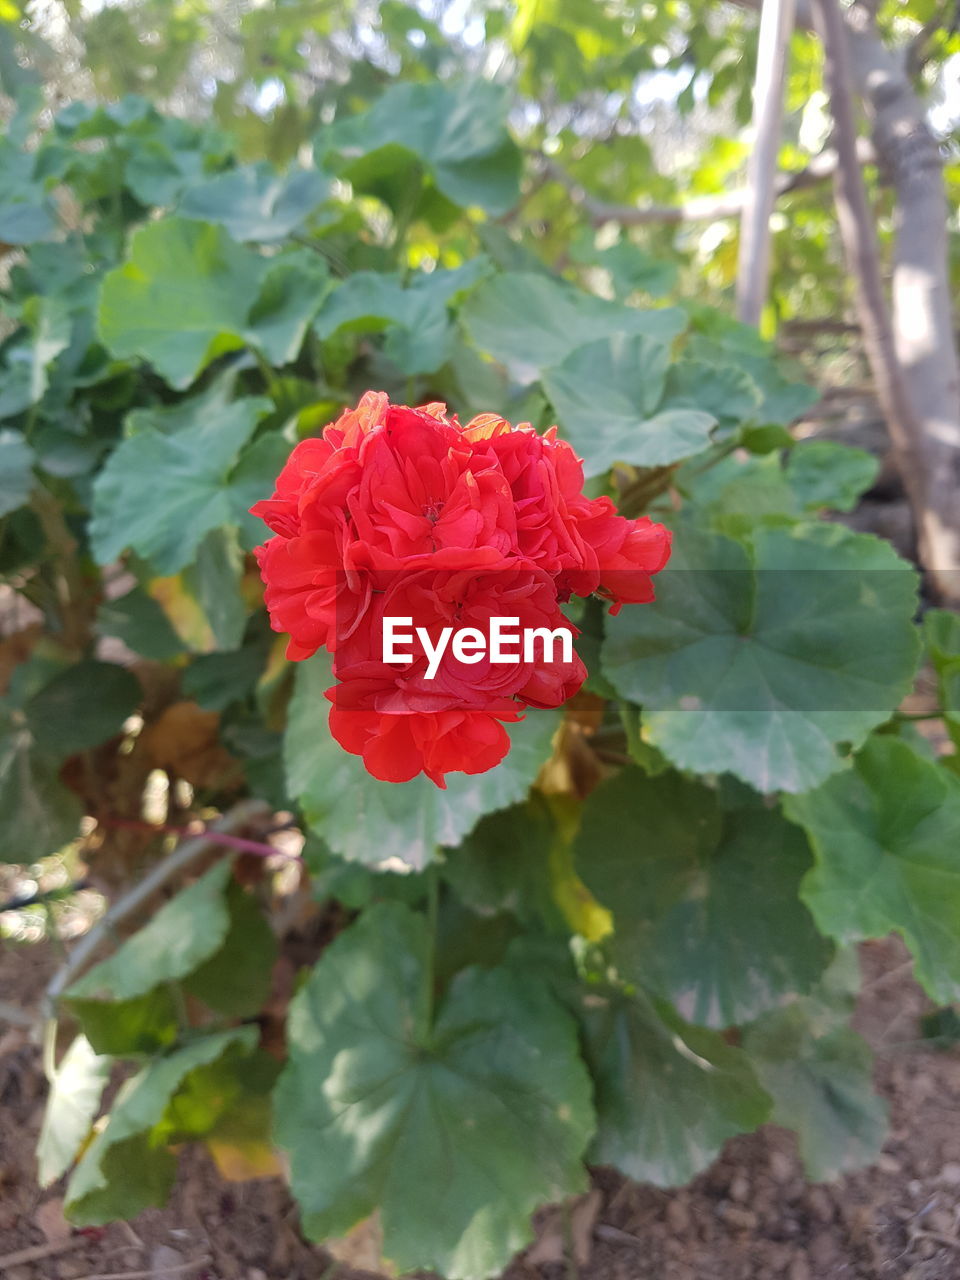 RED ROSE BLOOMING OUTDOORS